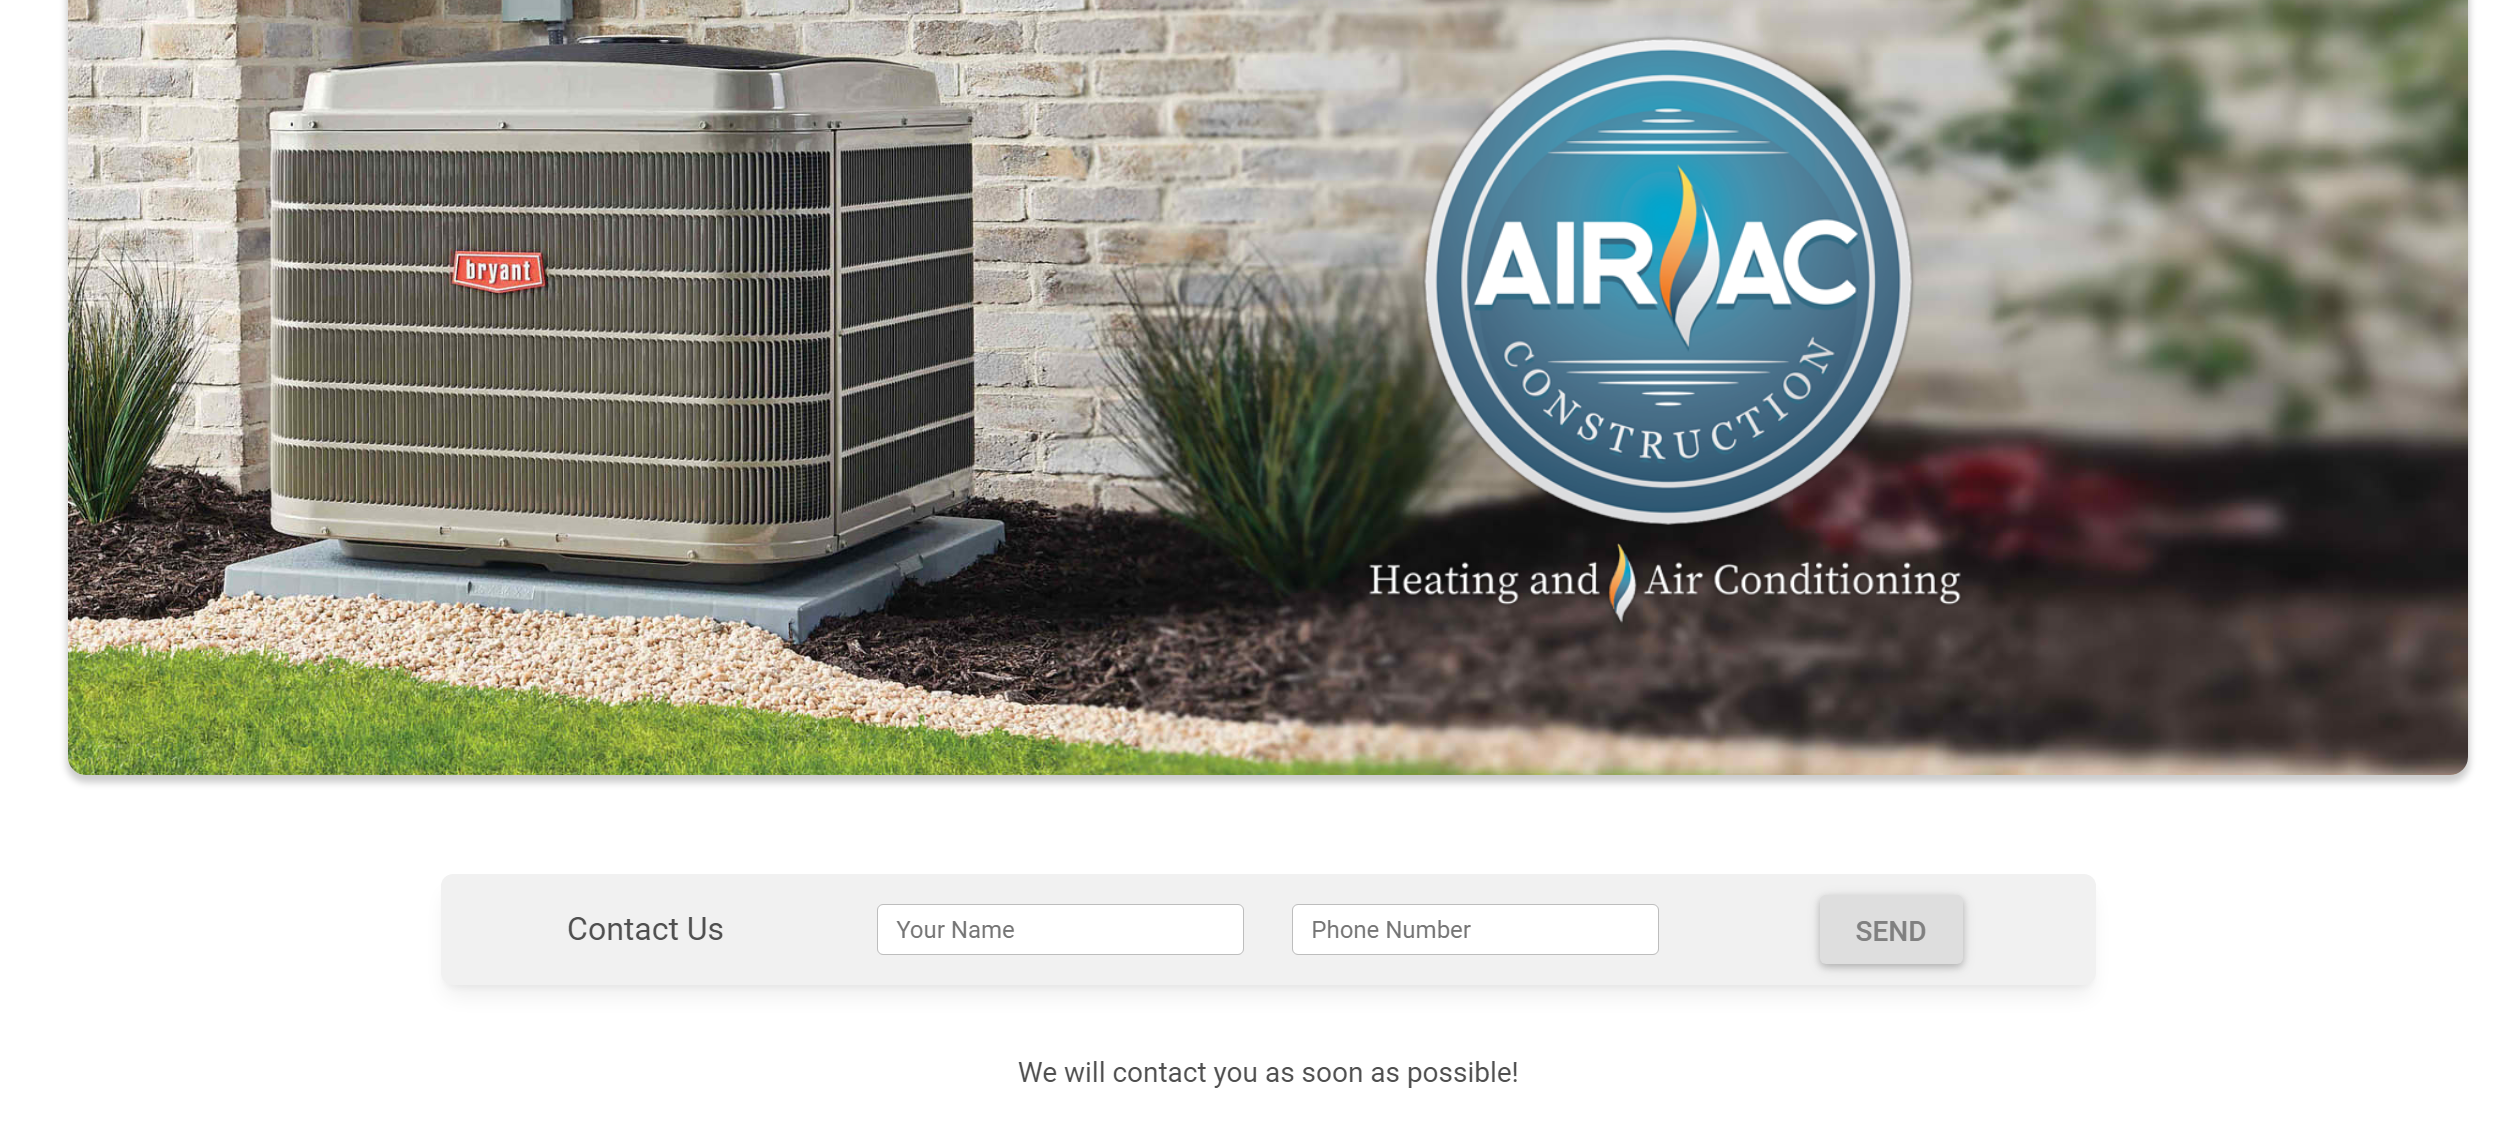 Website for Air AC Construction